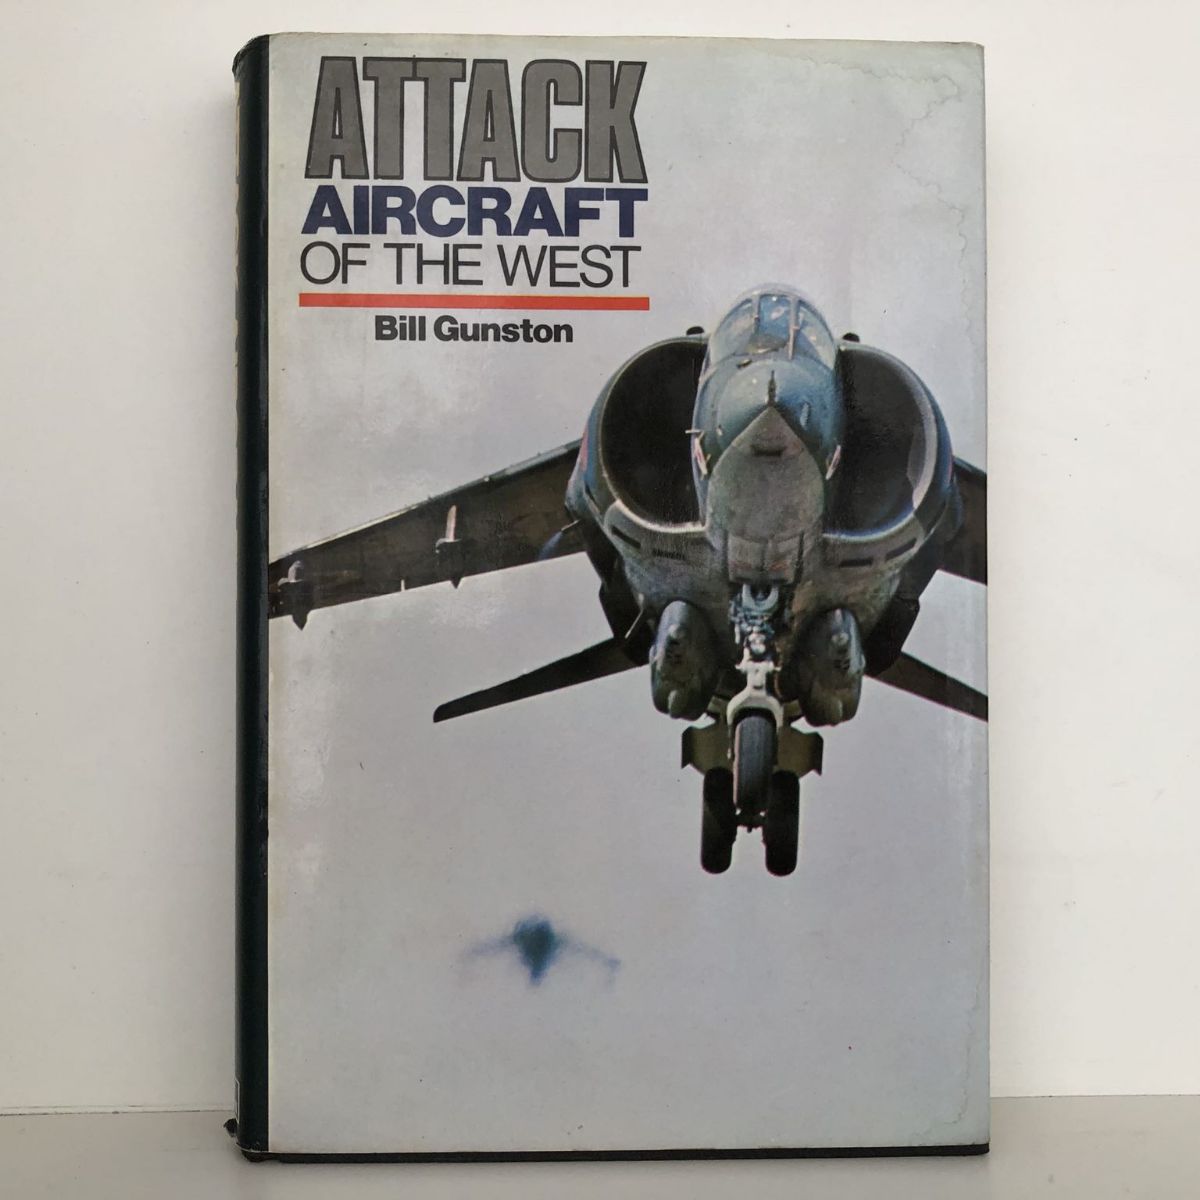 ATTACK AIRCRAFT OF THE WEST